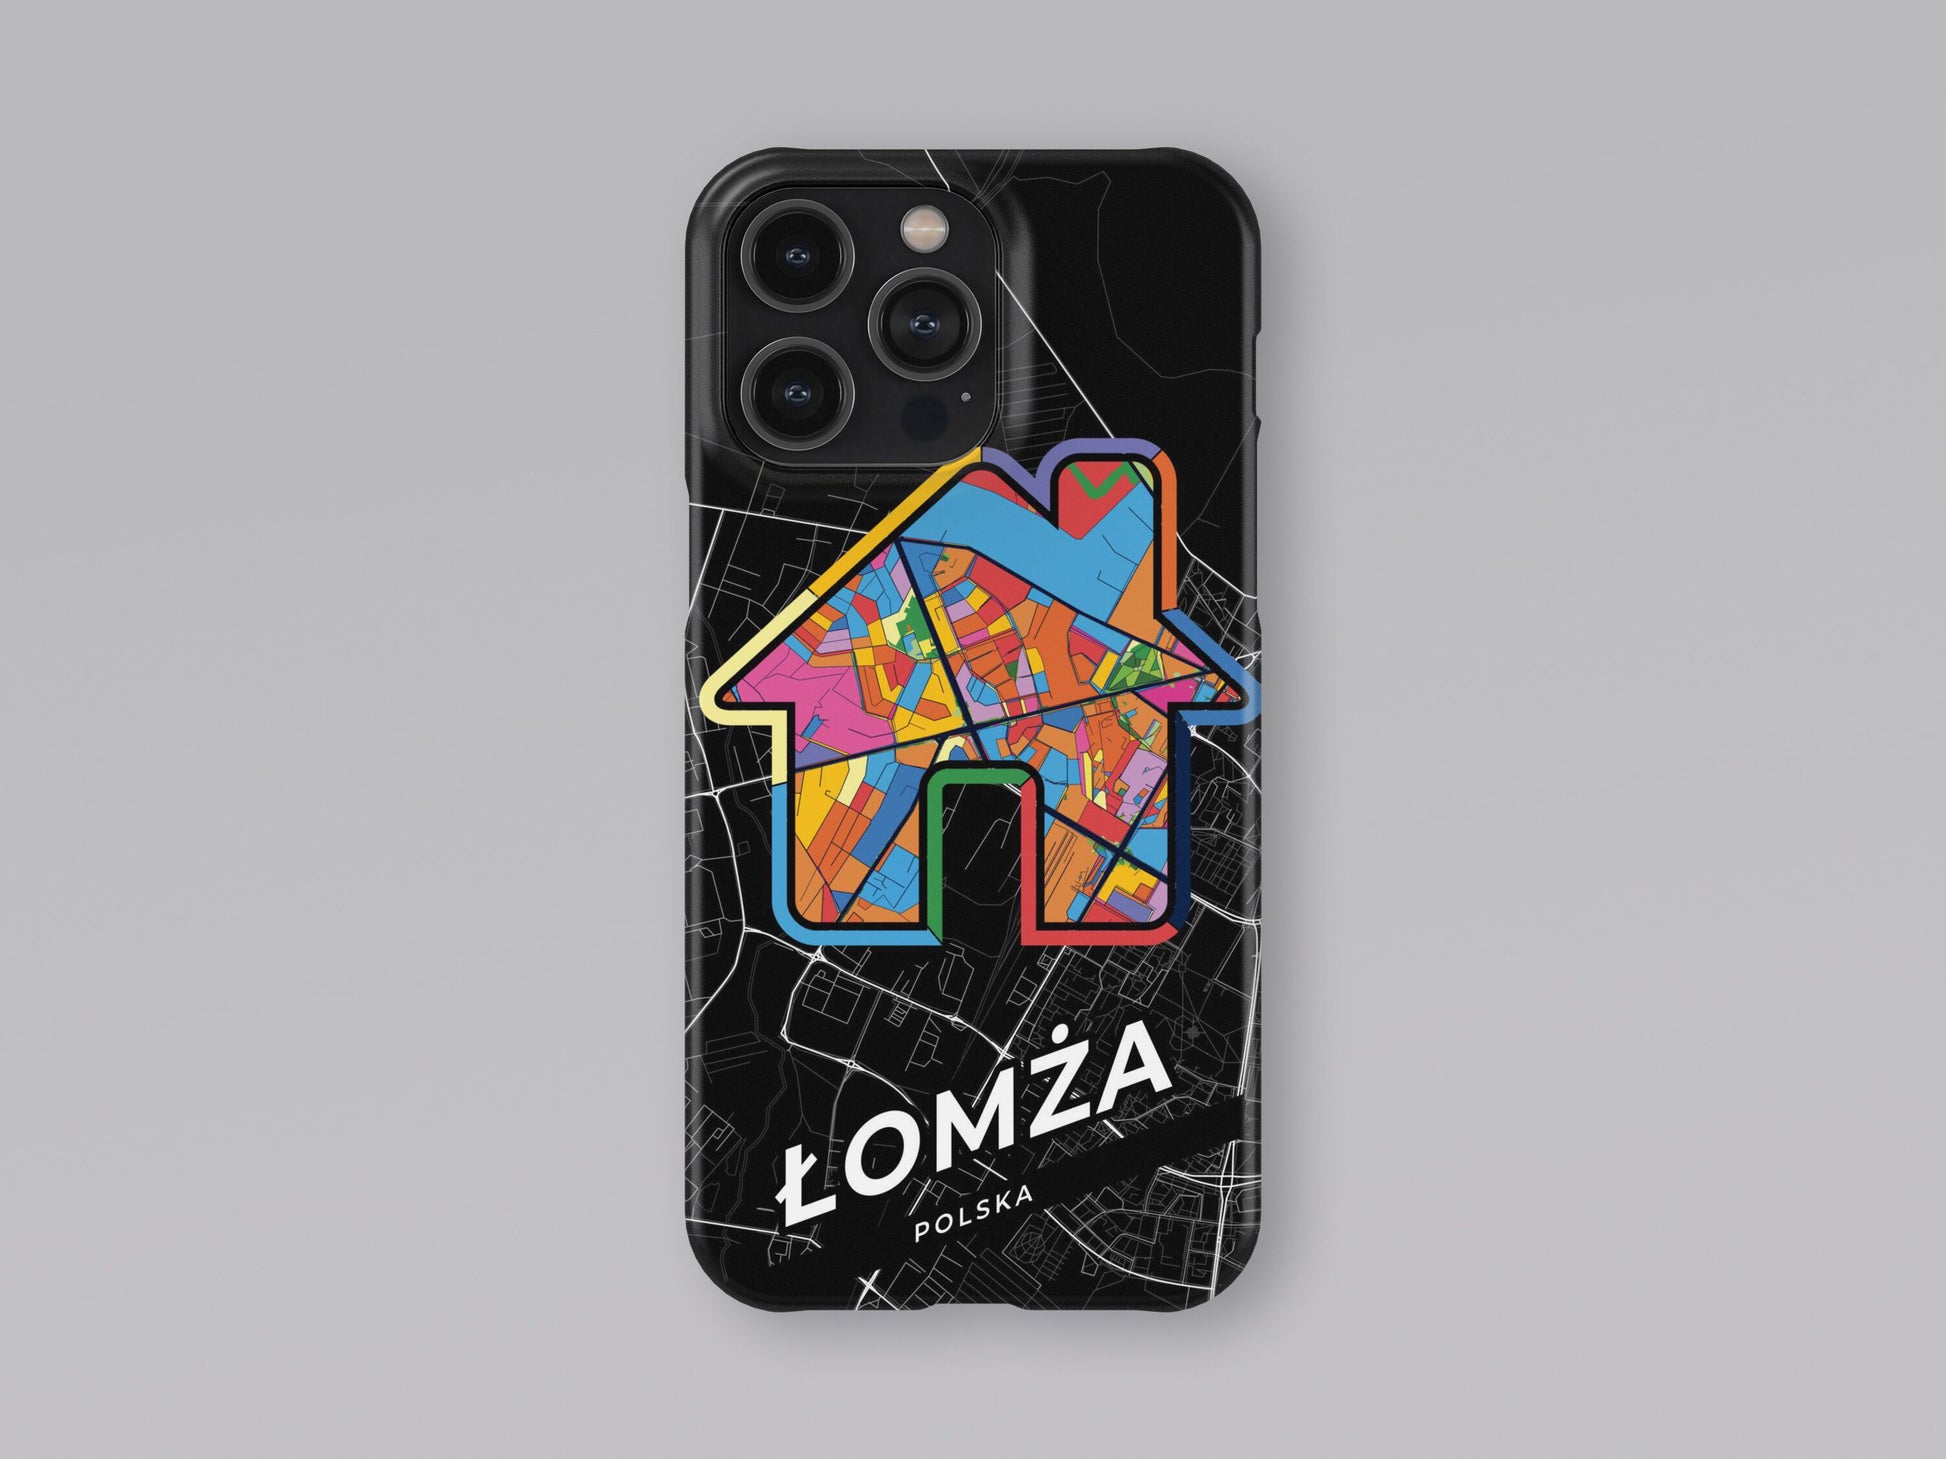 Łomża Poland slim phone case with colorful icon 3